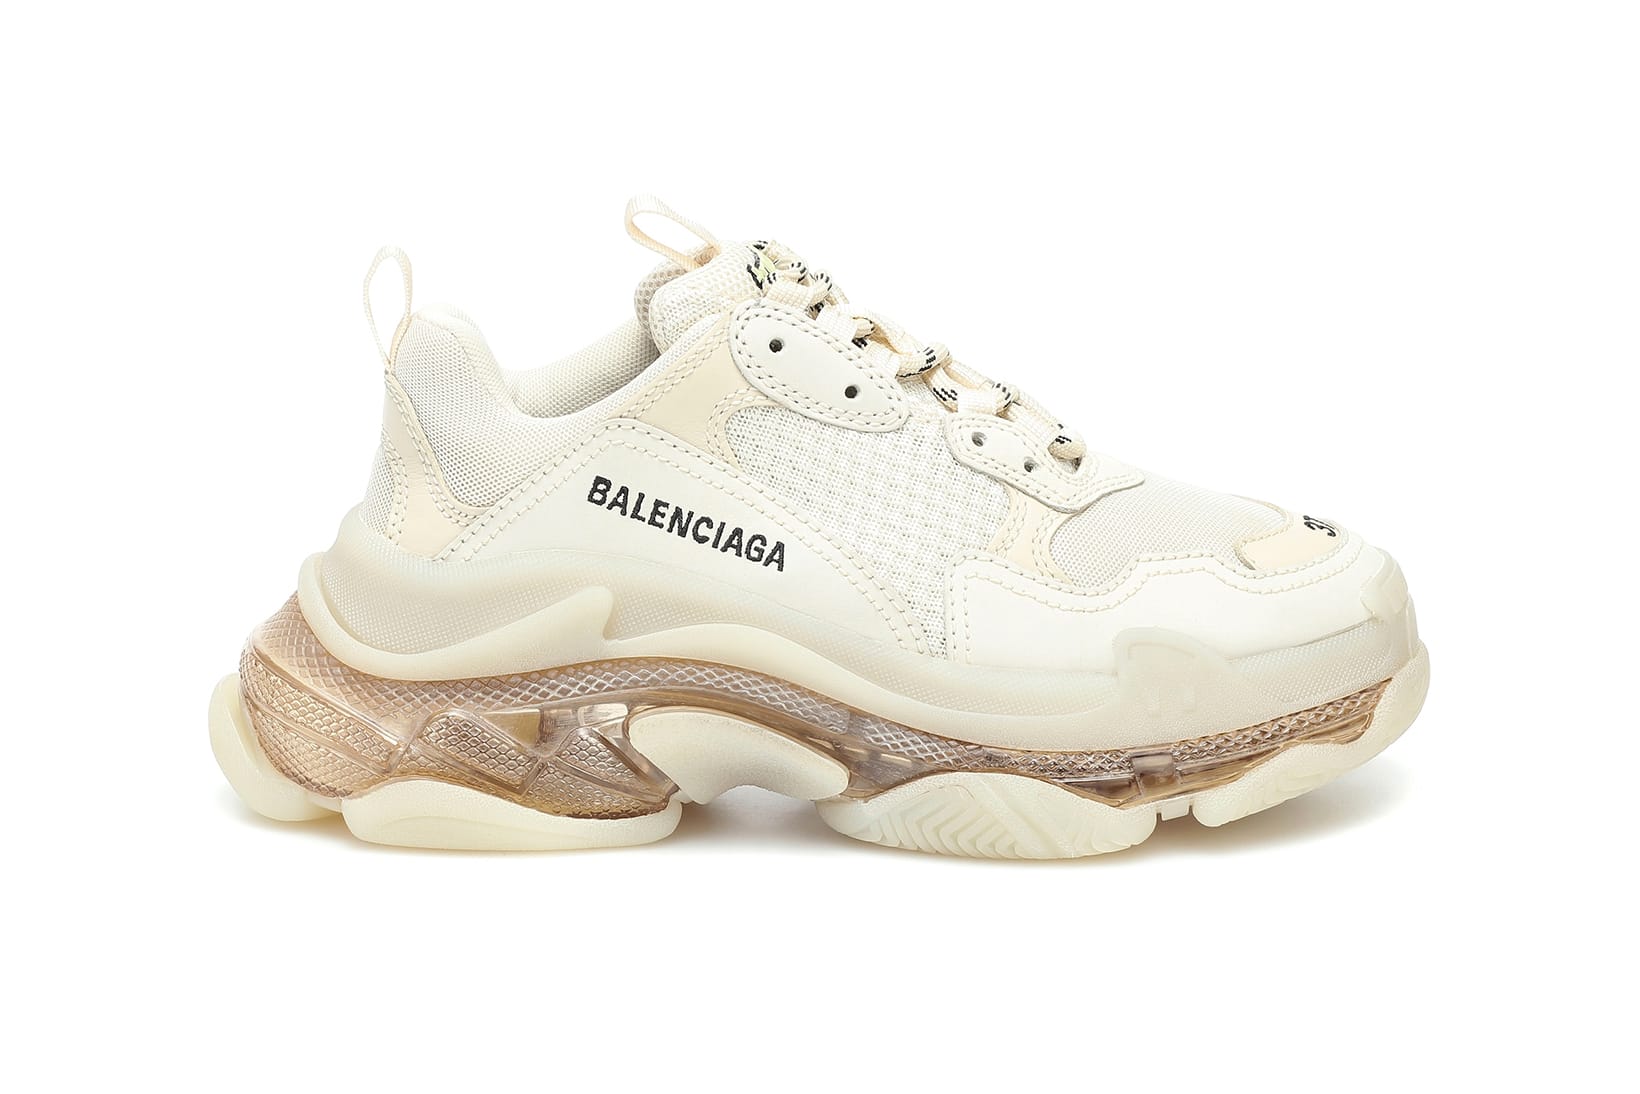 How to get Balenciaga Triple S Trainers Black Pinterest